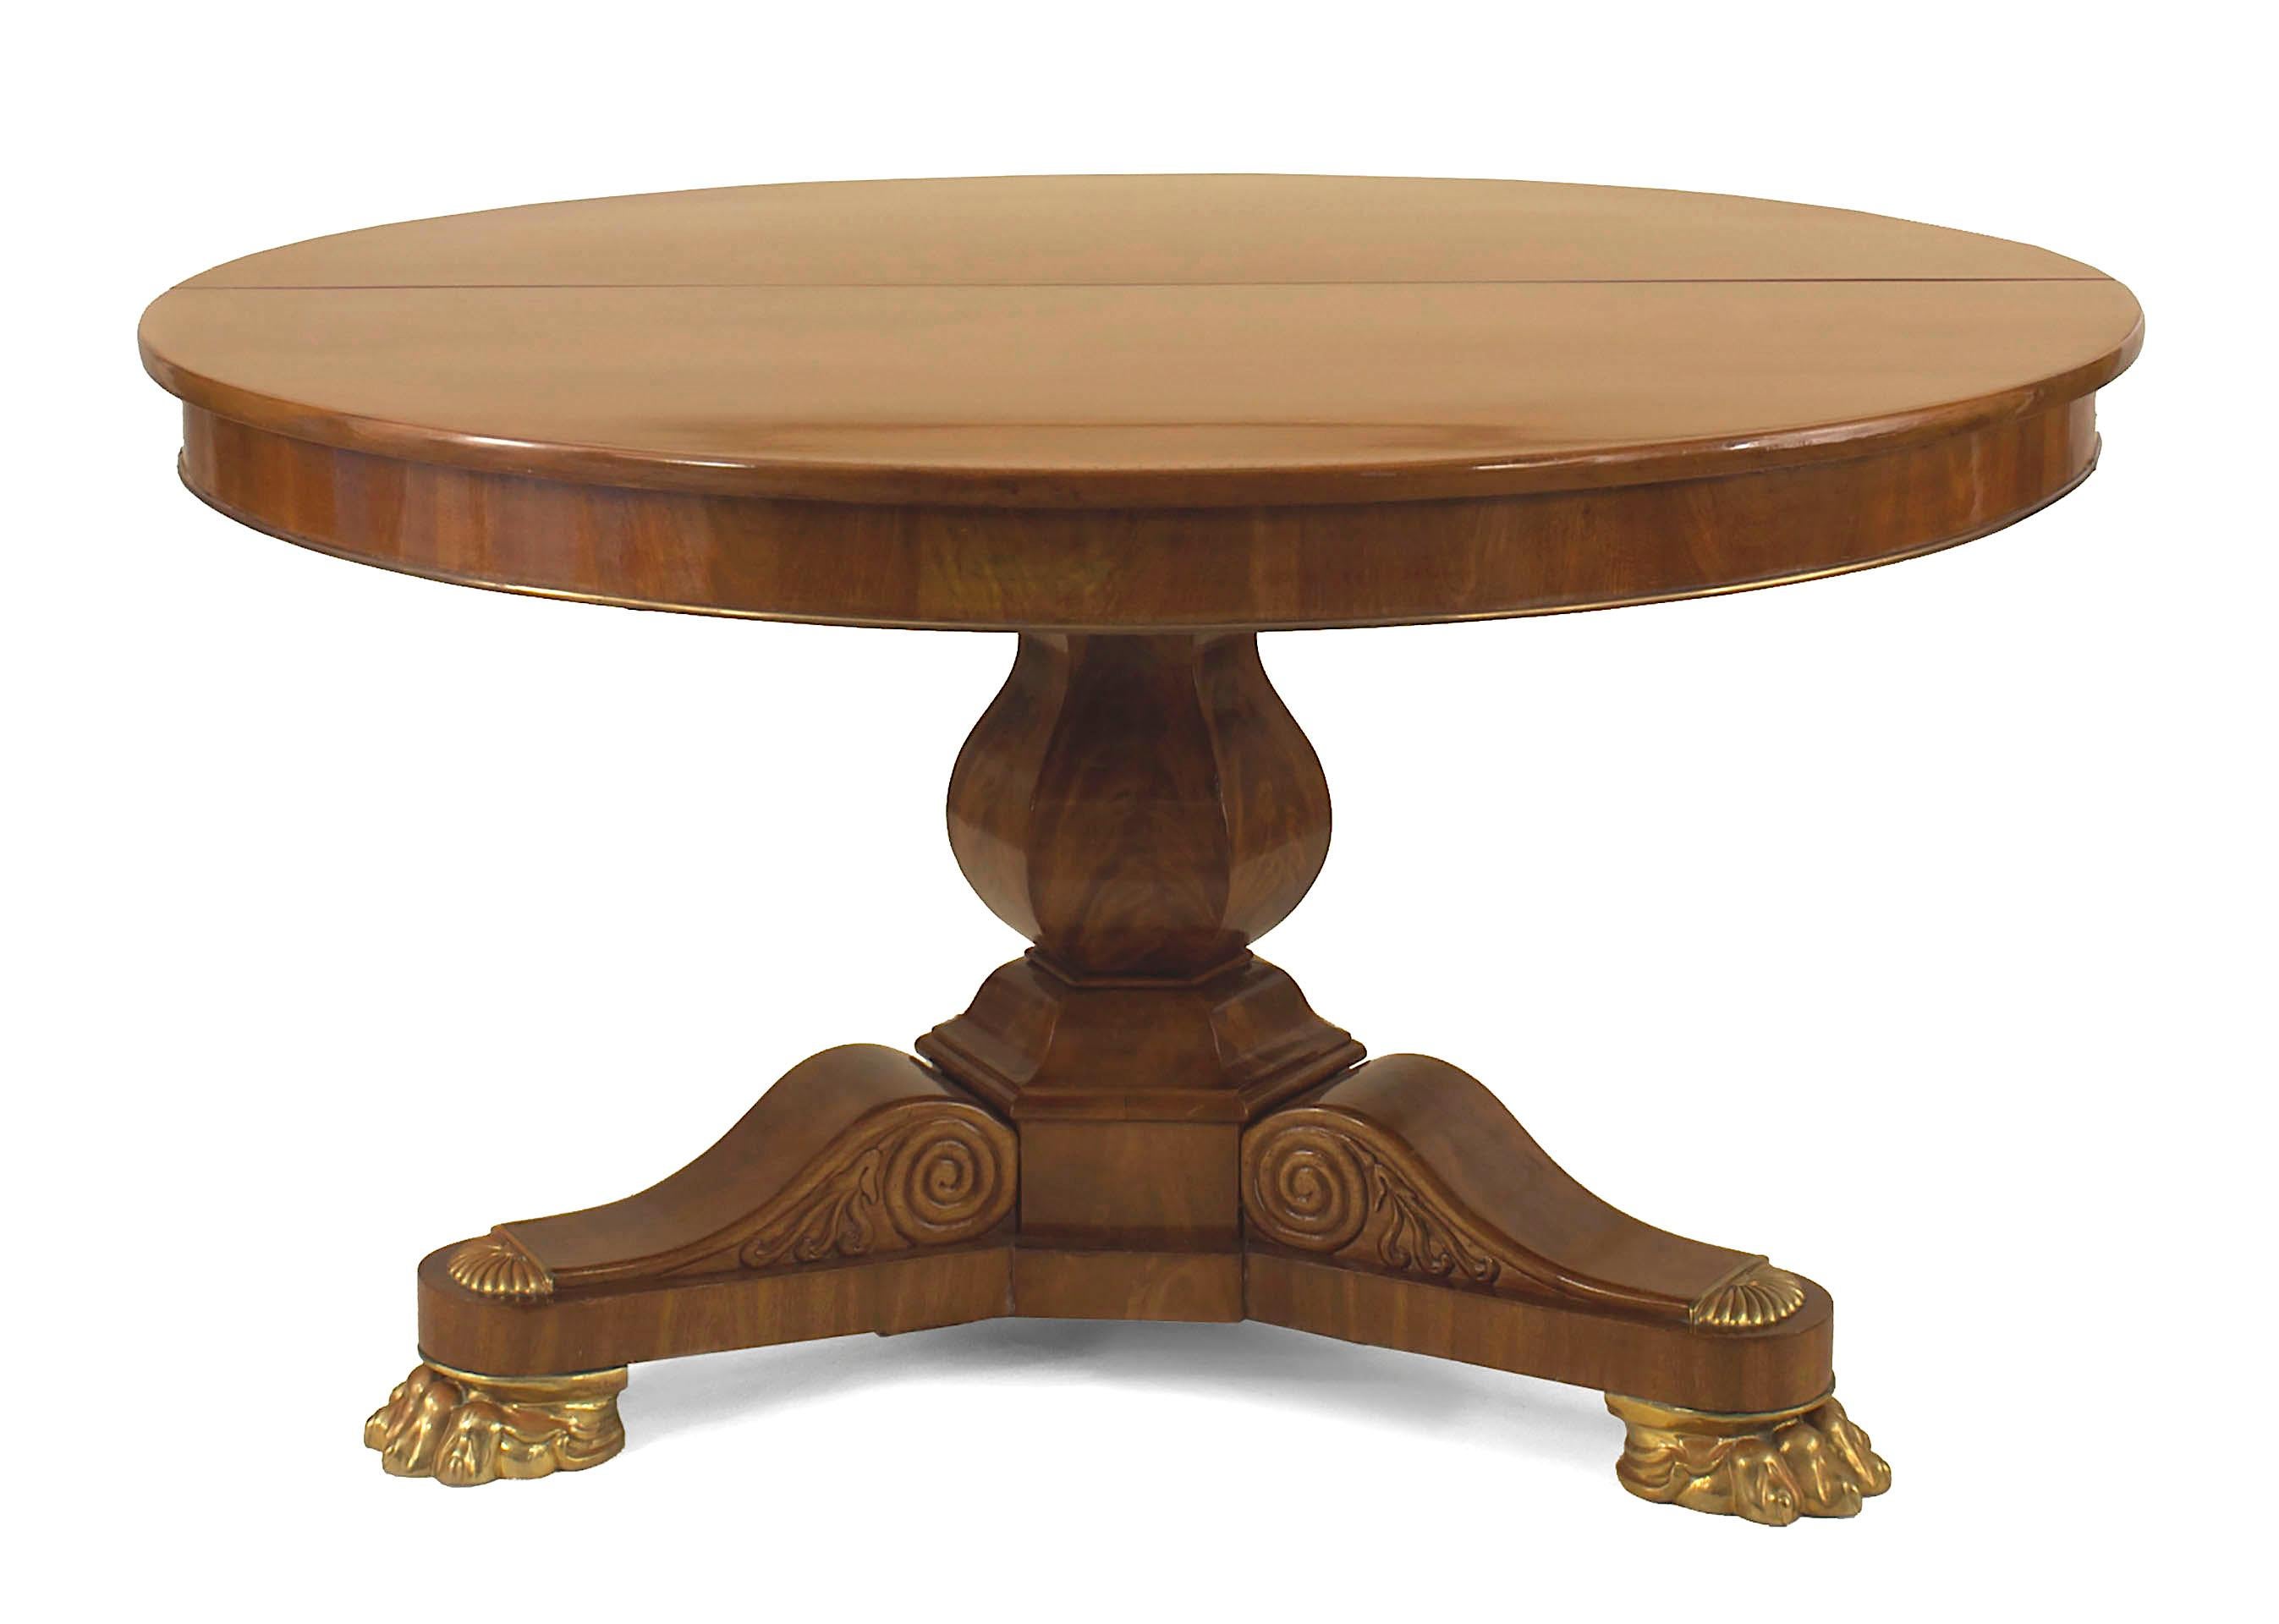 2 English Regency-style mahogany round (extension) dining tables with a tripartite carved scroll design pedestal and brass trim and replaced claw feet. (Each table has 2-30